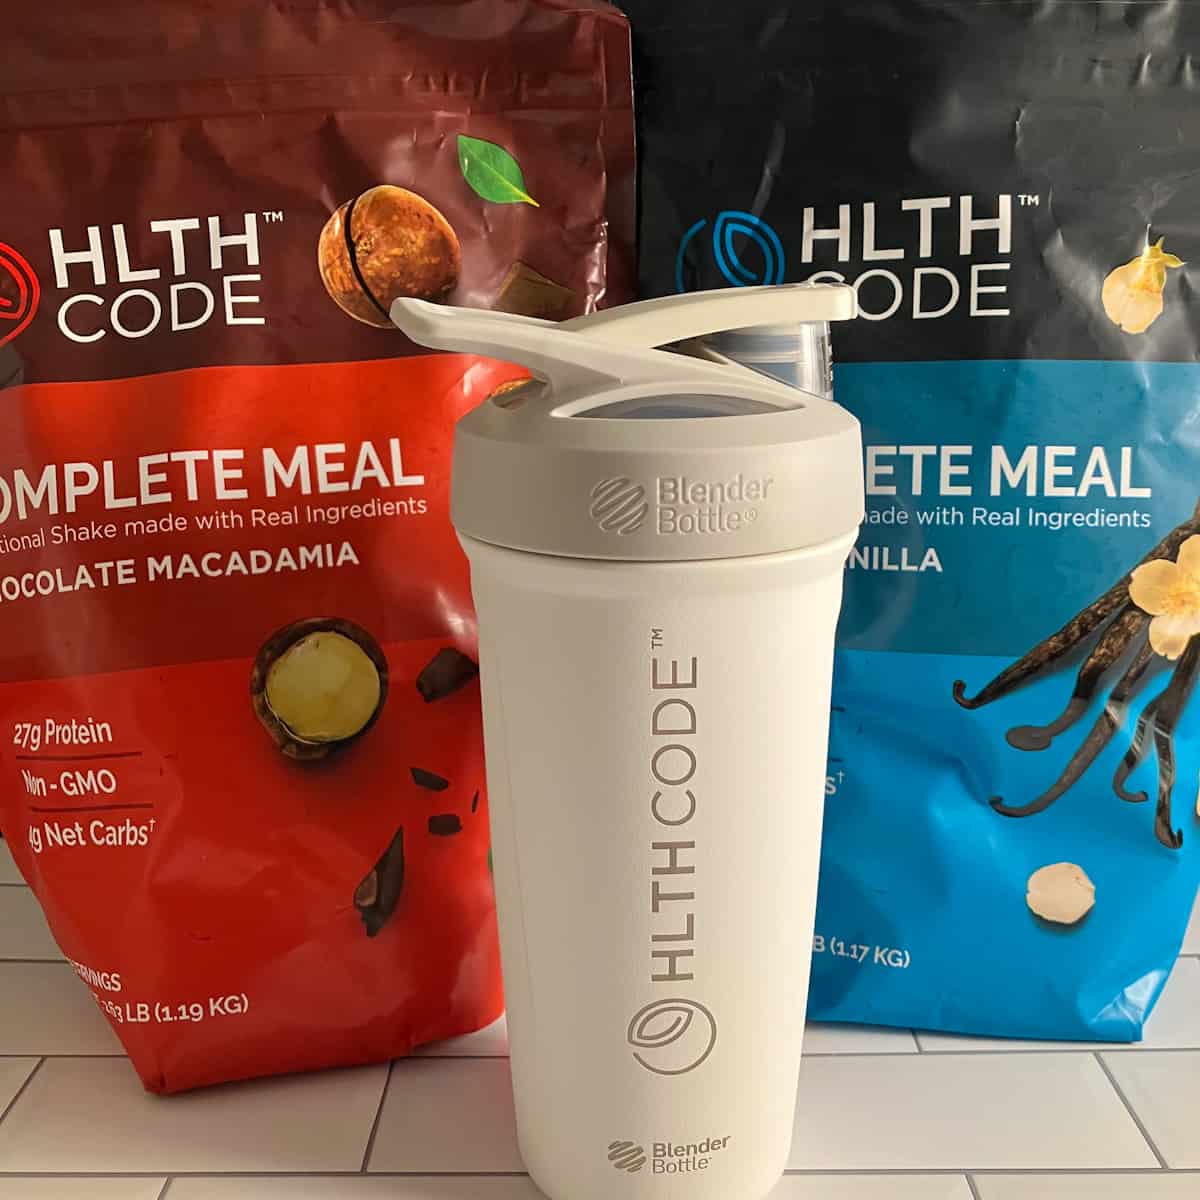 hlthcode complete meal